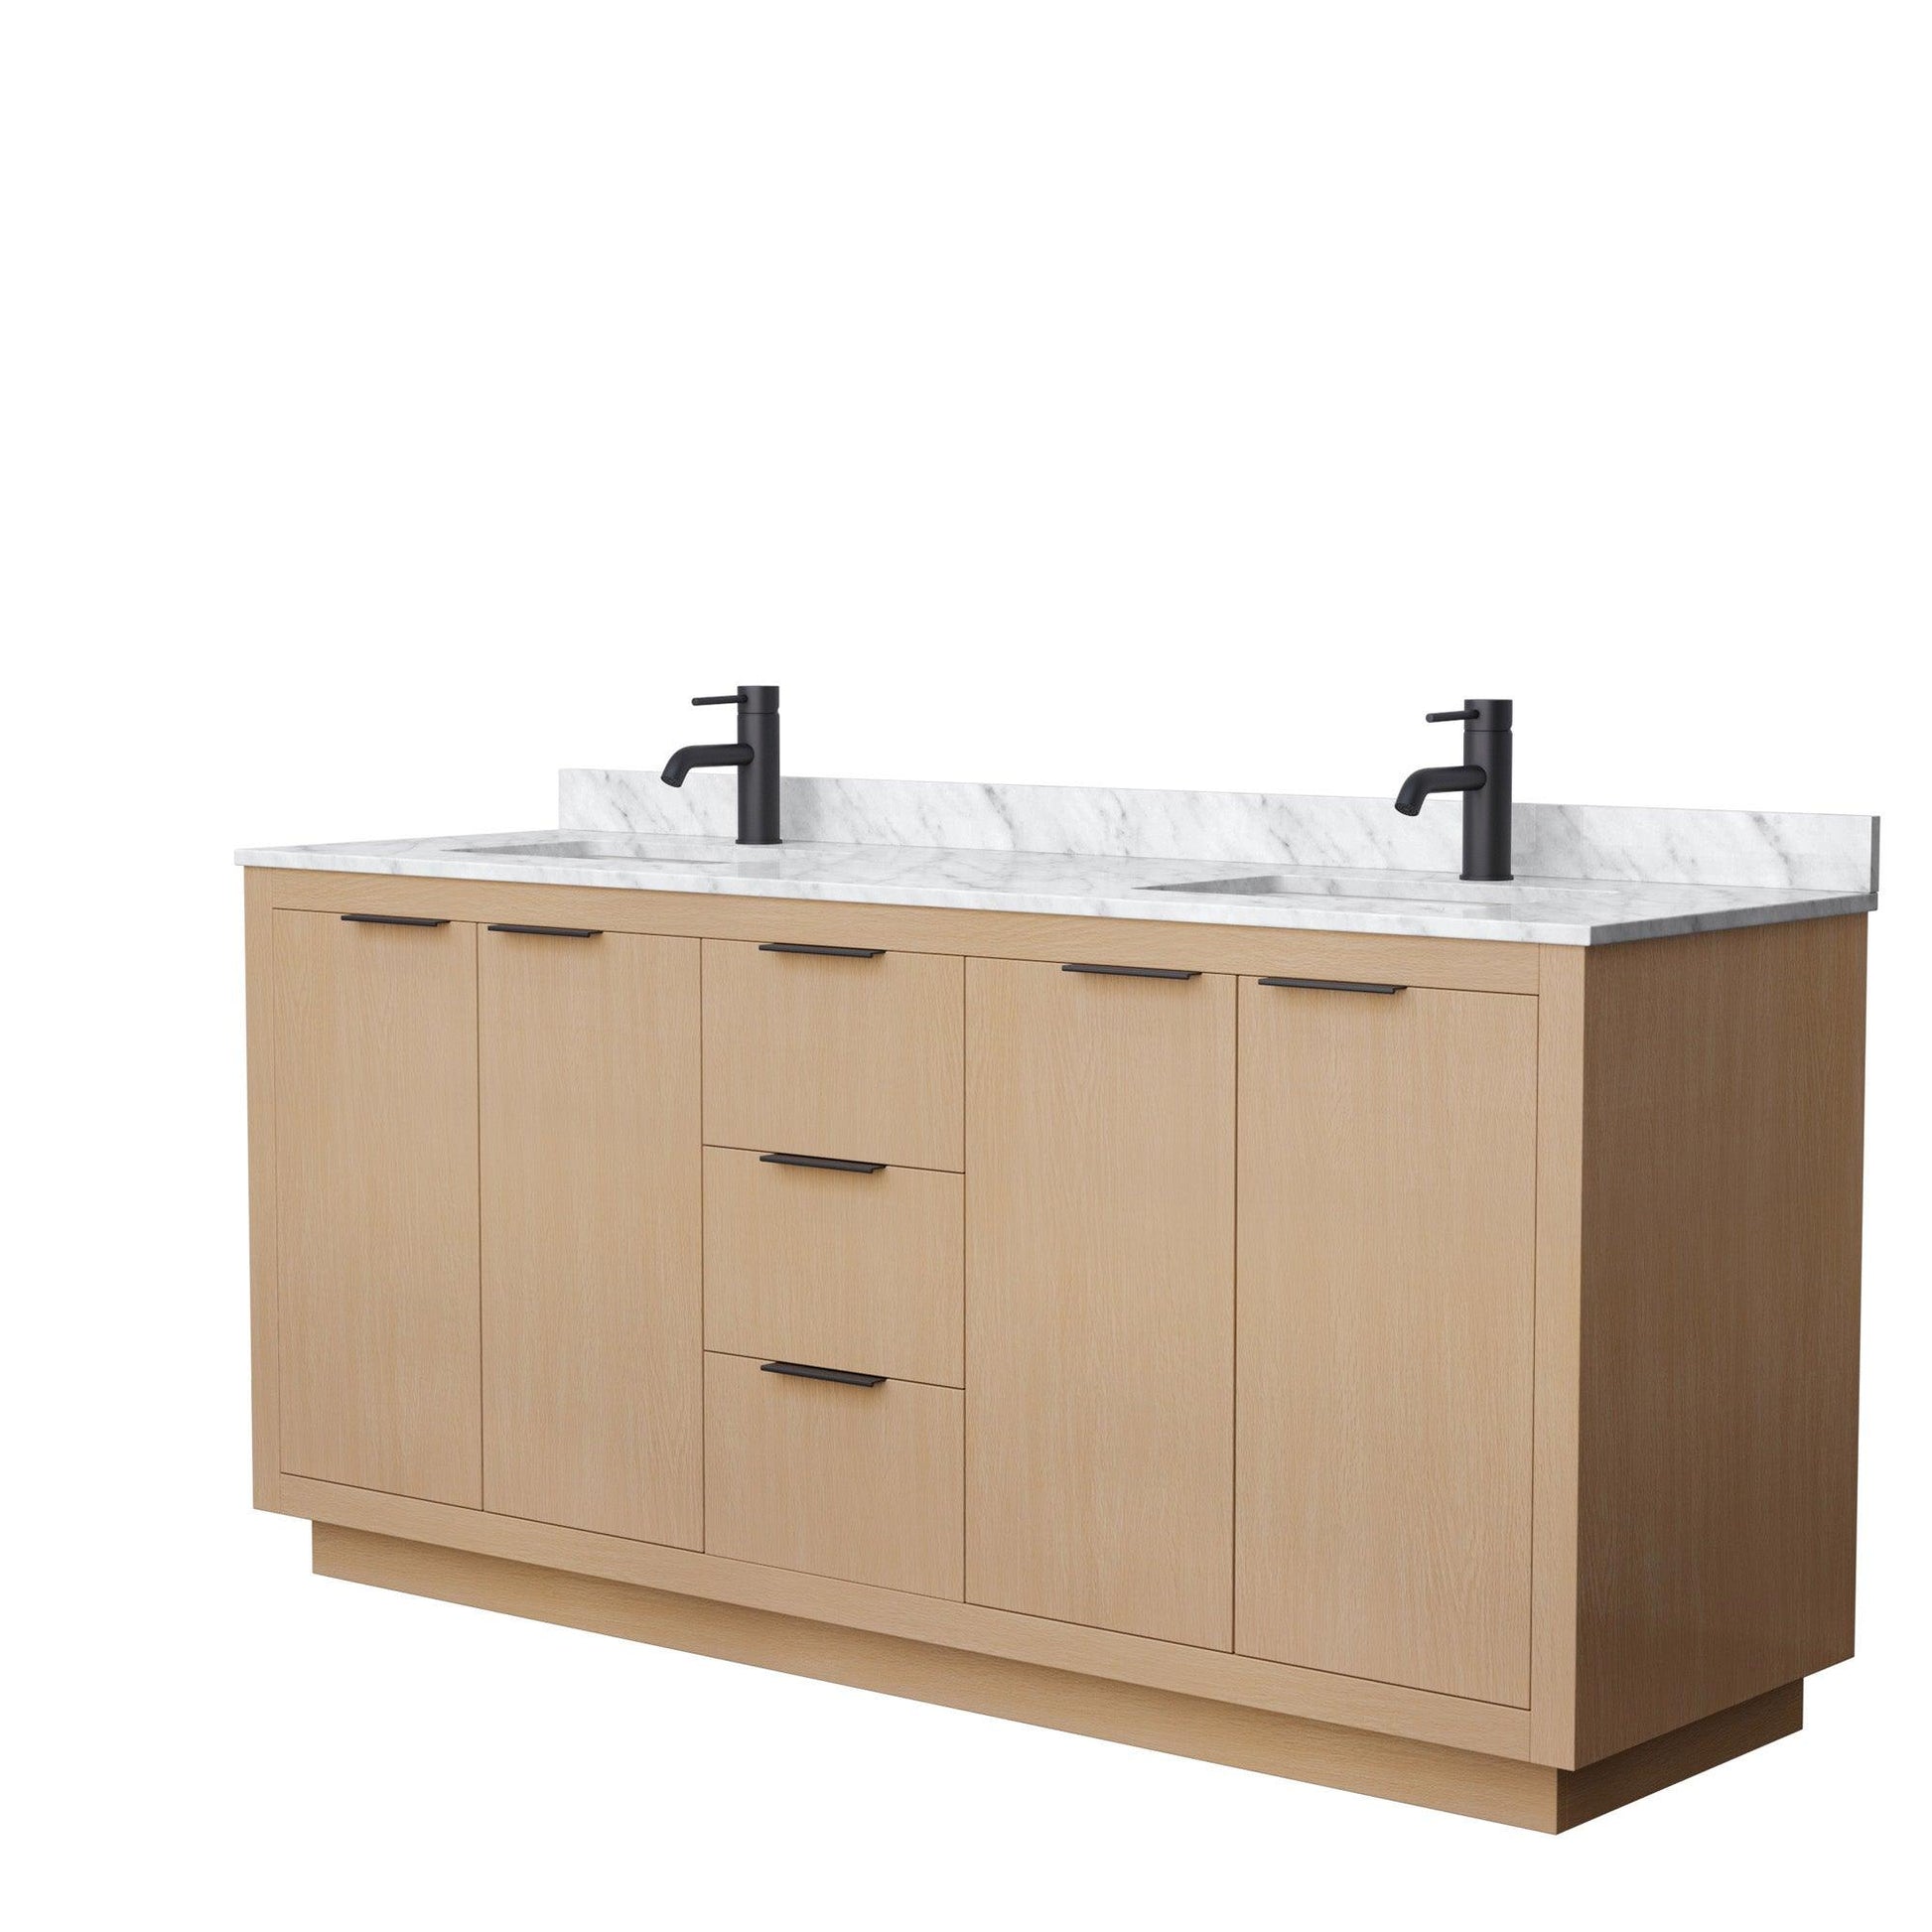 
  
  Wyndham Collection Maroni Double Bathroom Vanity in Light Straw, White Carrara Marble Countertop, Undermount Square Sinks
  
